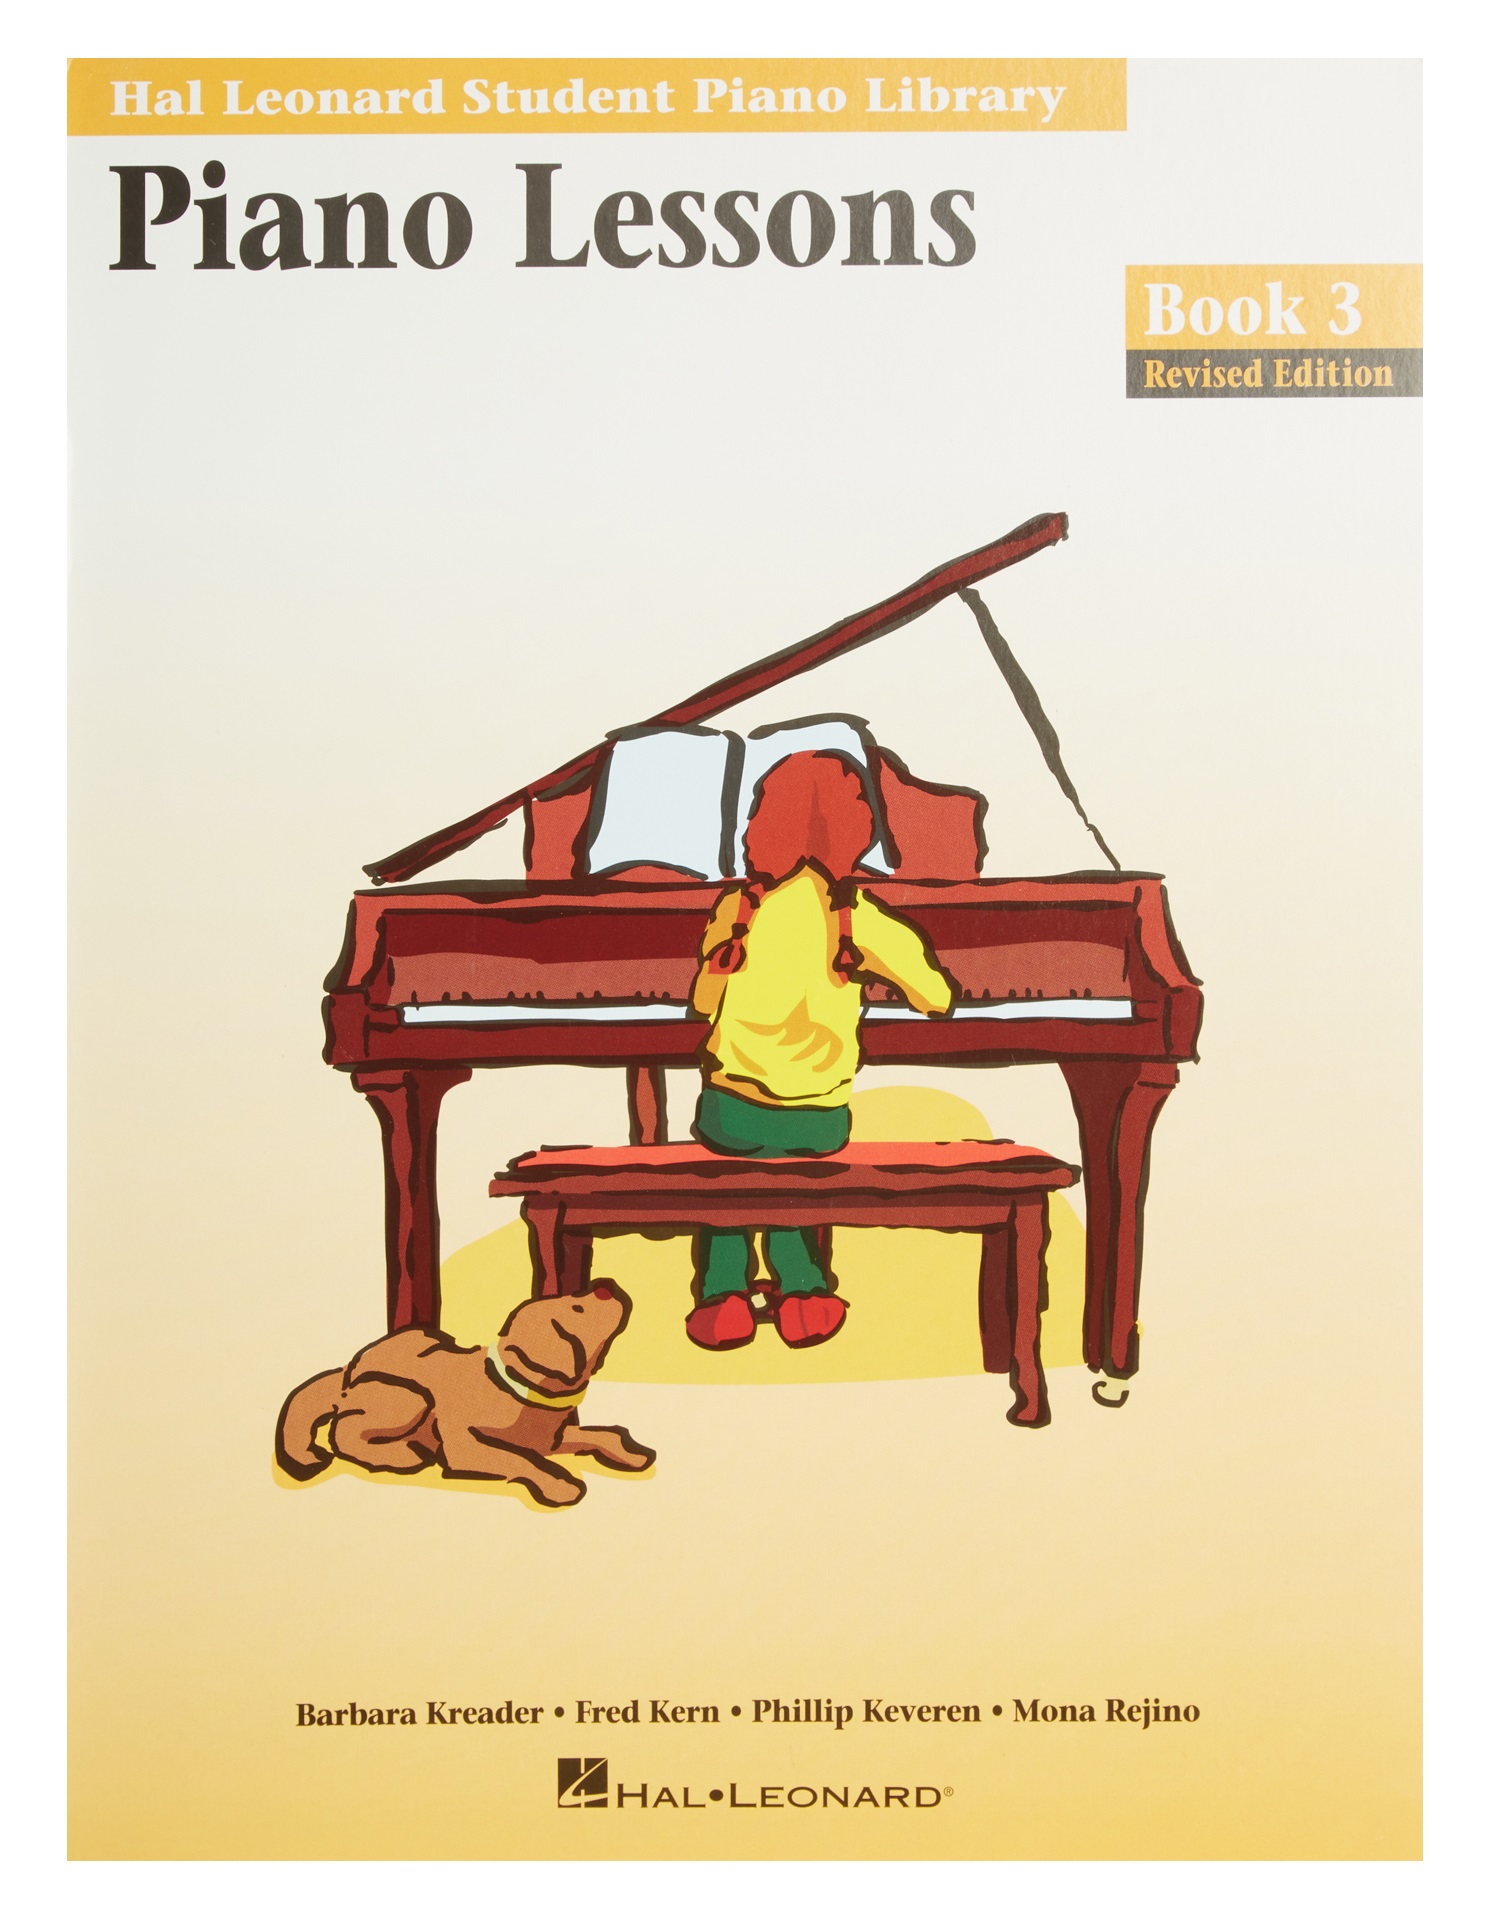 MS Hal Leonard Student Piano Library: Piano Lessons Book 3